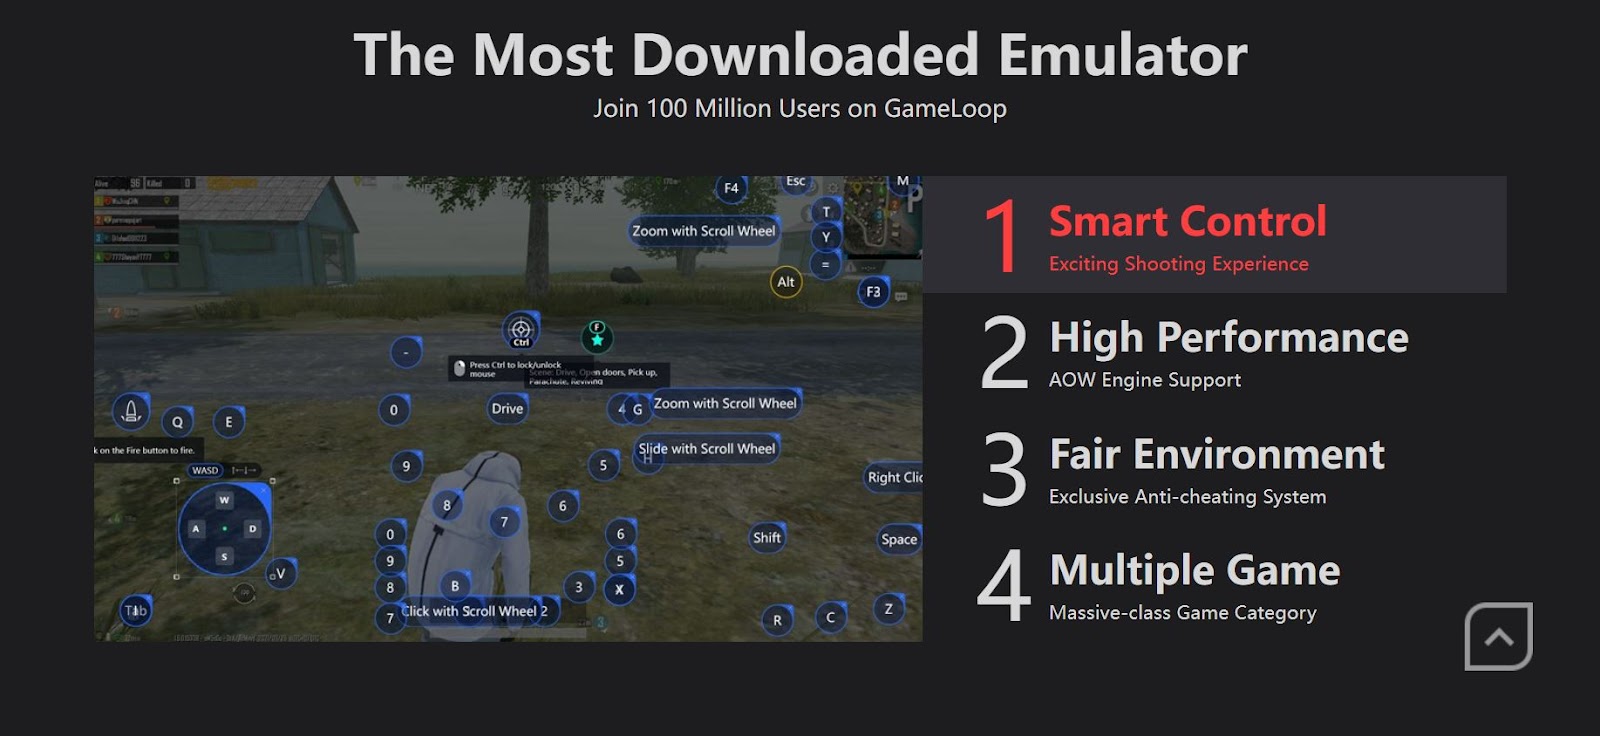 Gameloop download guide: how to play your favourite mobile games